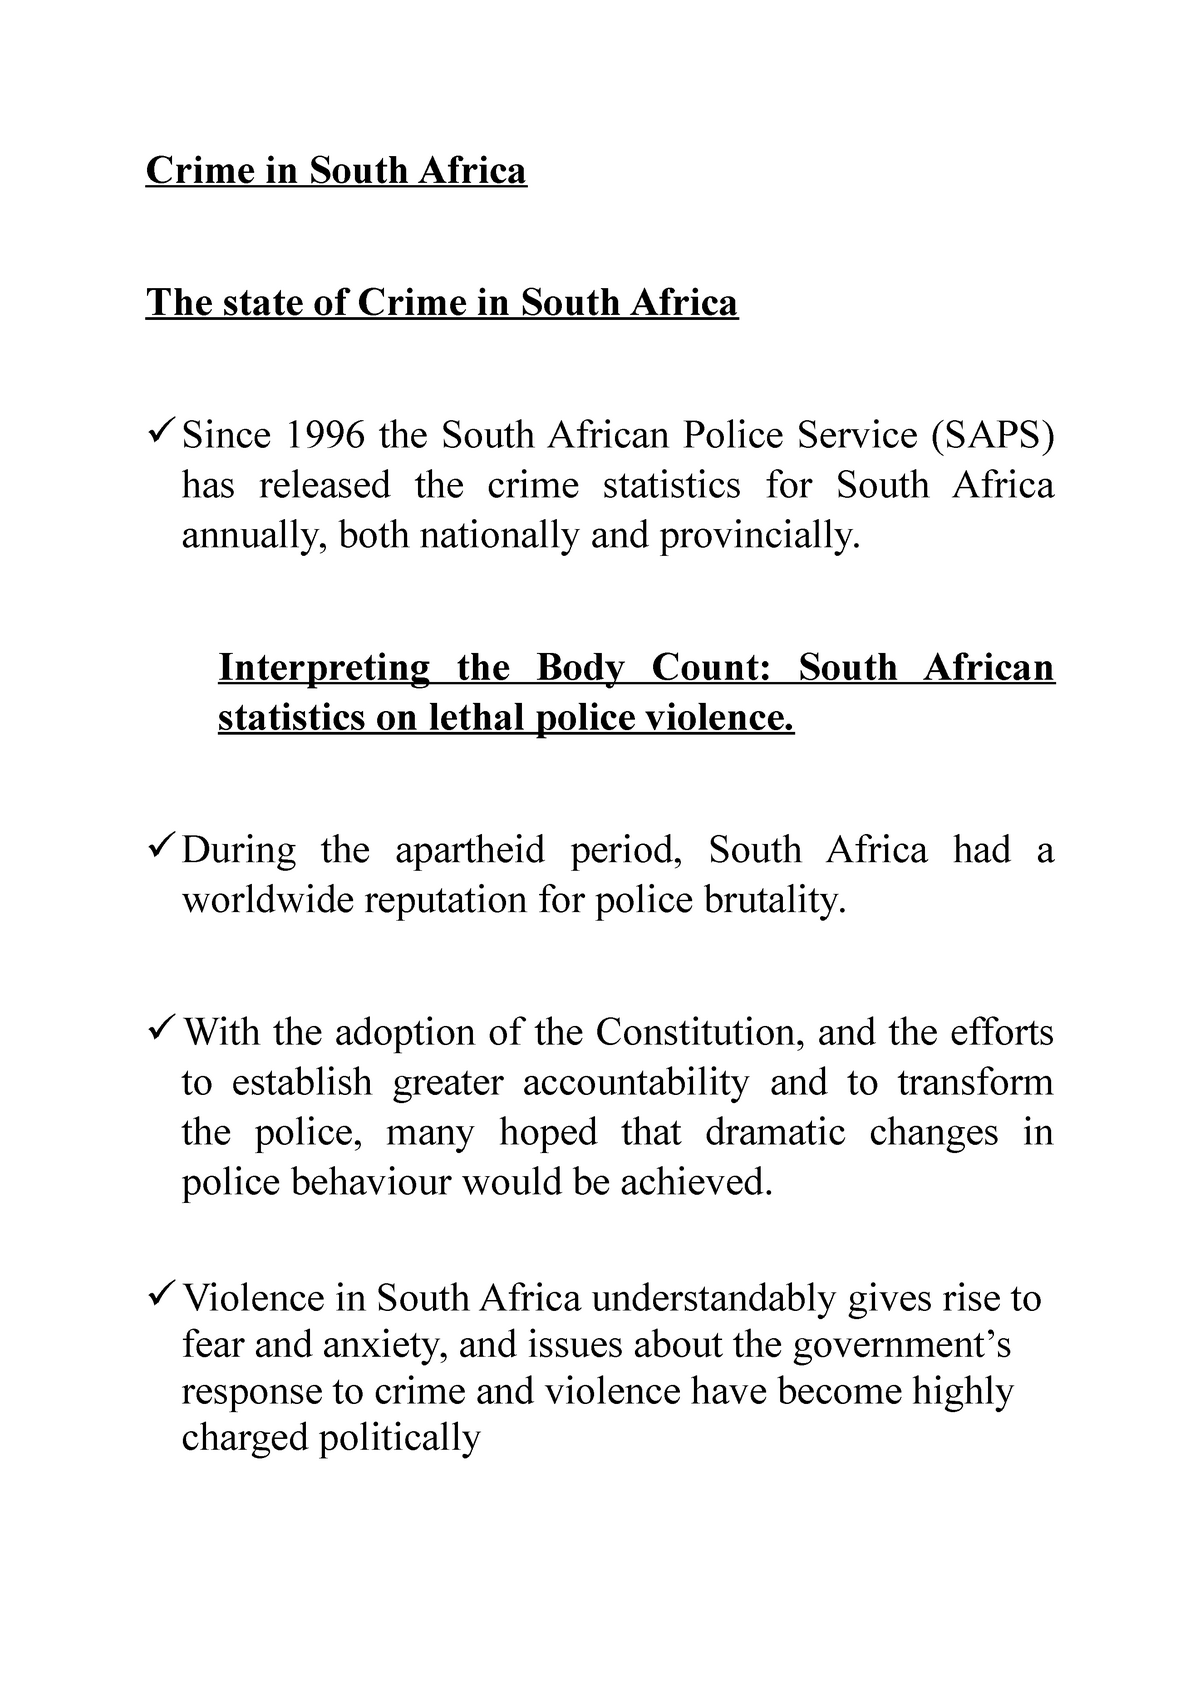 essay about crime in south africa